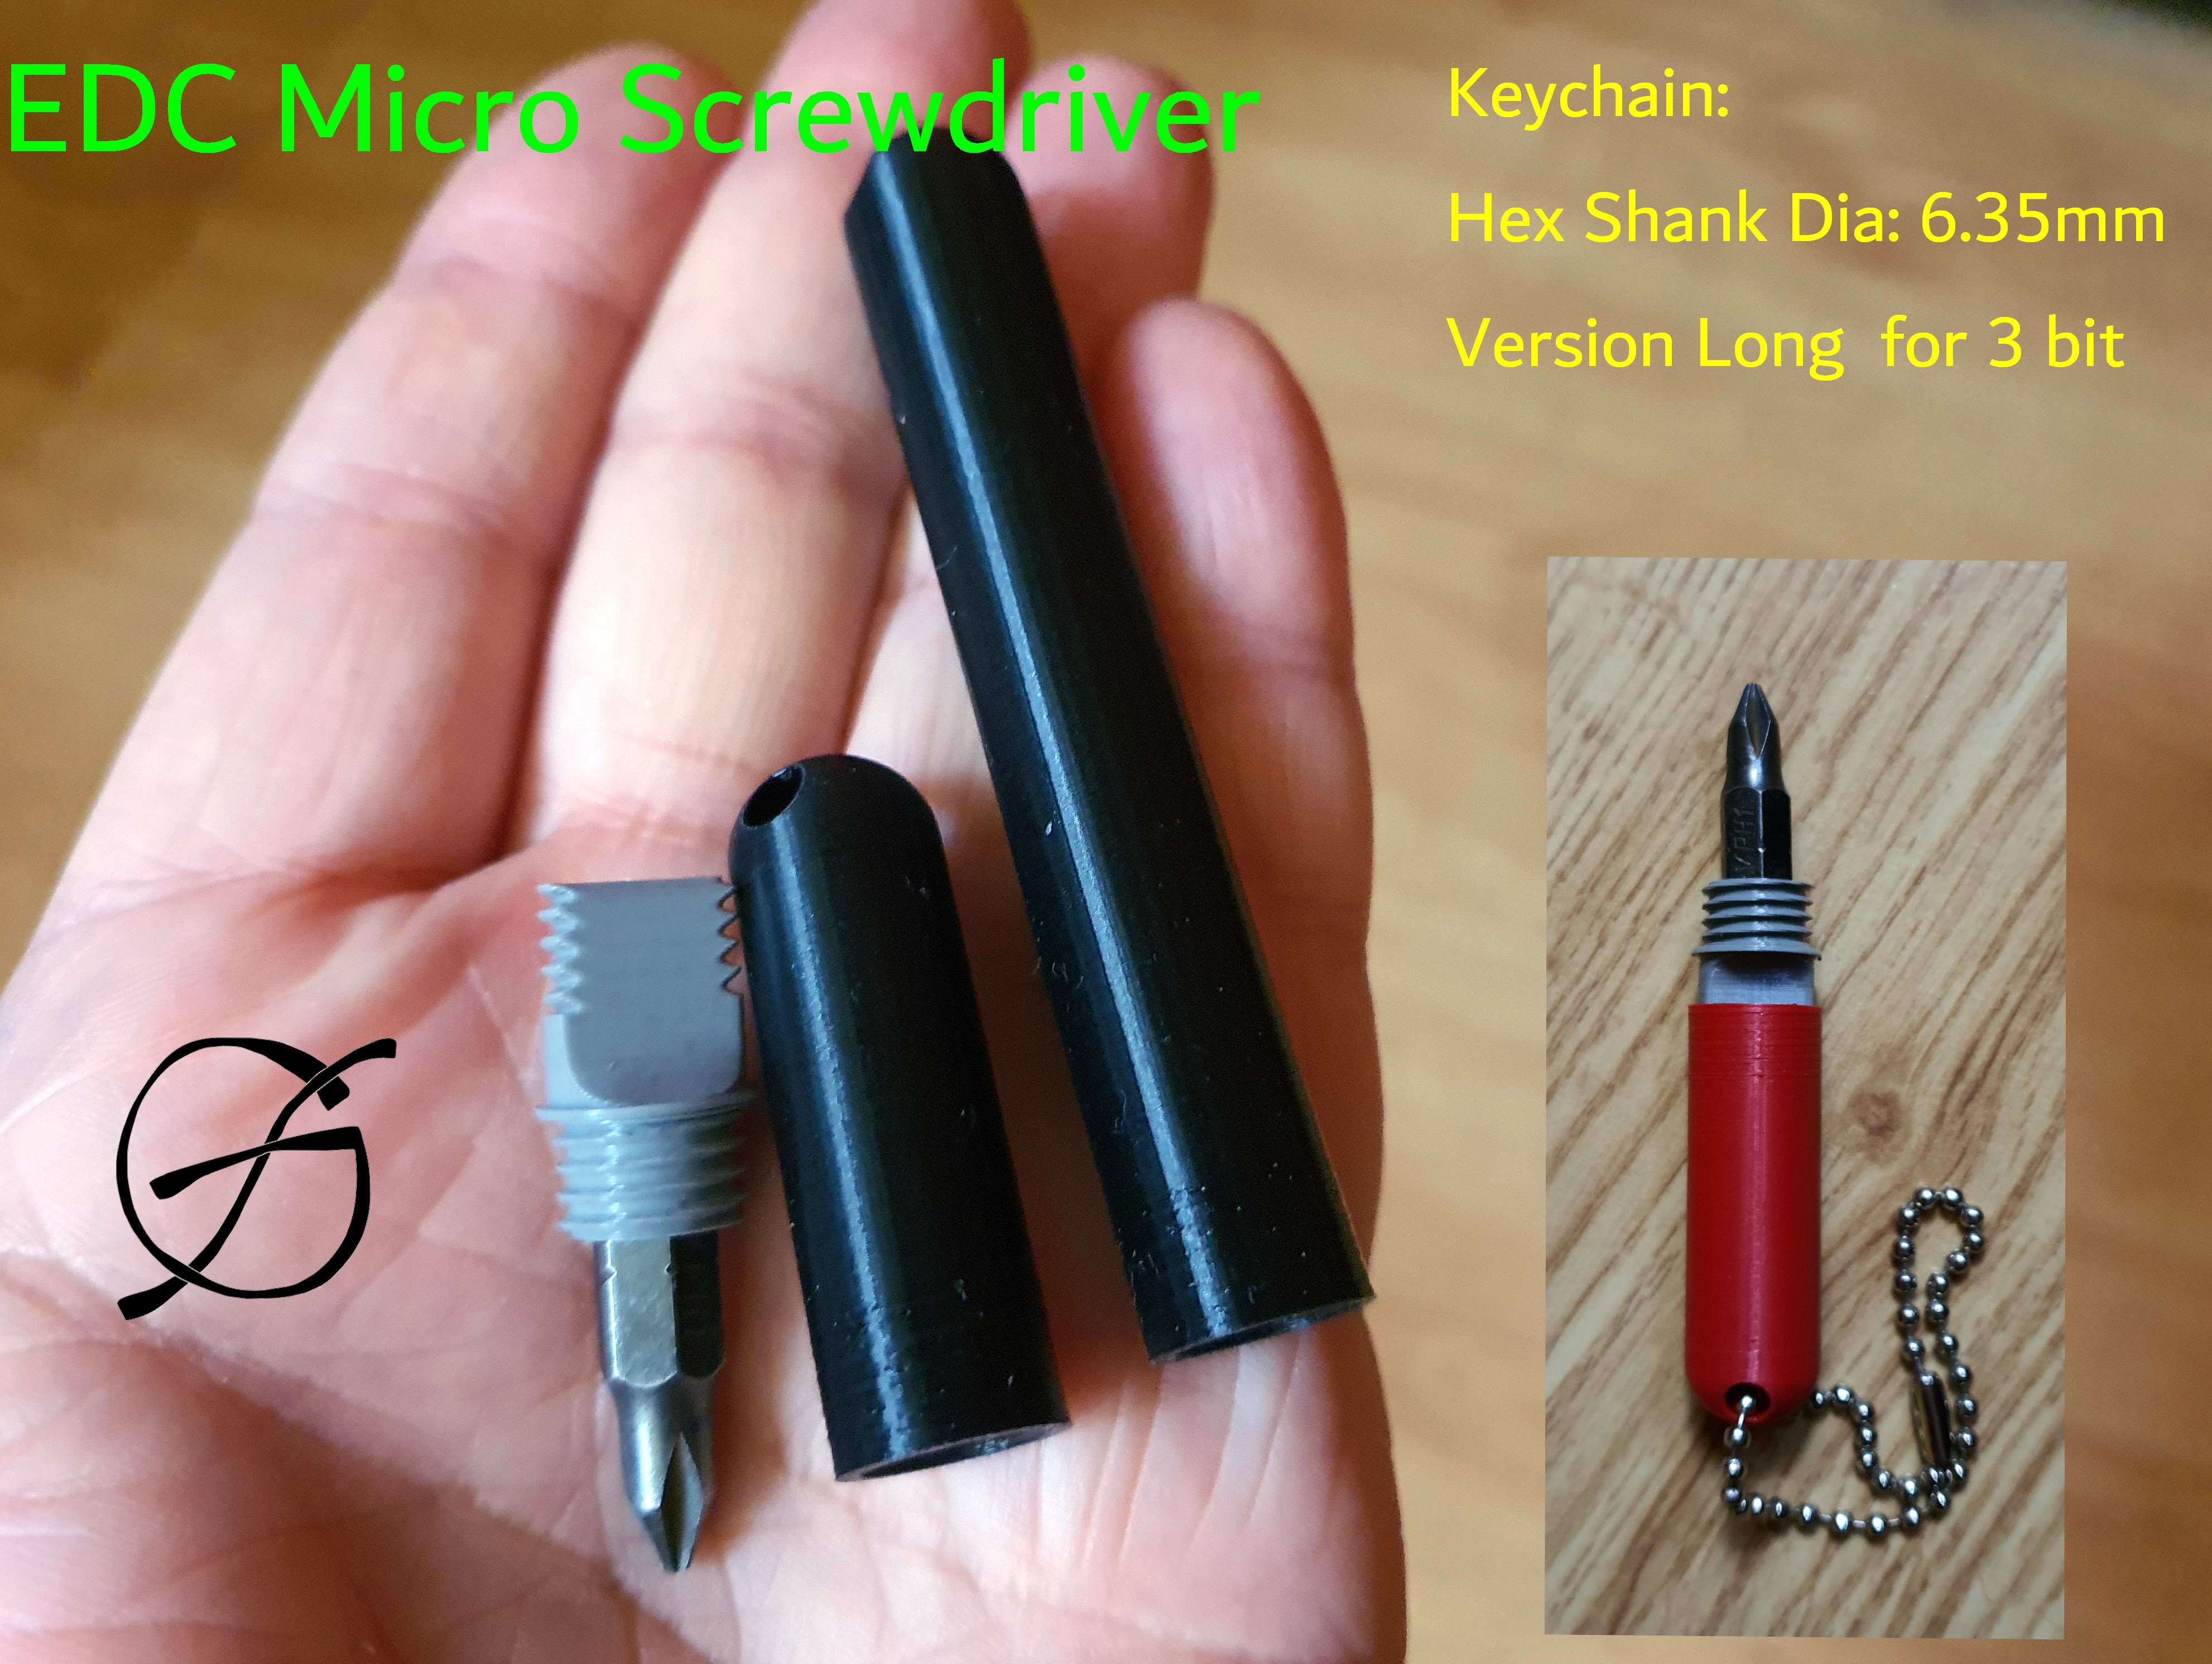 EDC Micro Screwdriver - Keychain for Hex Shank